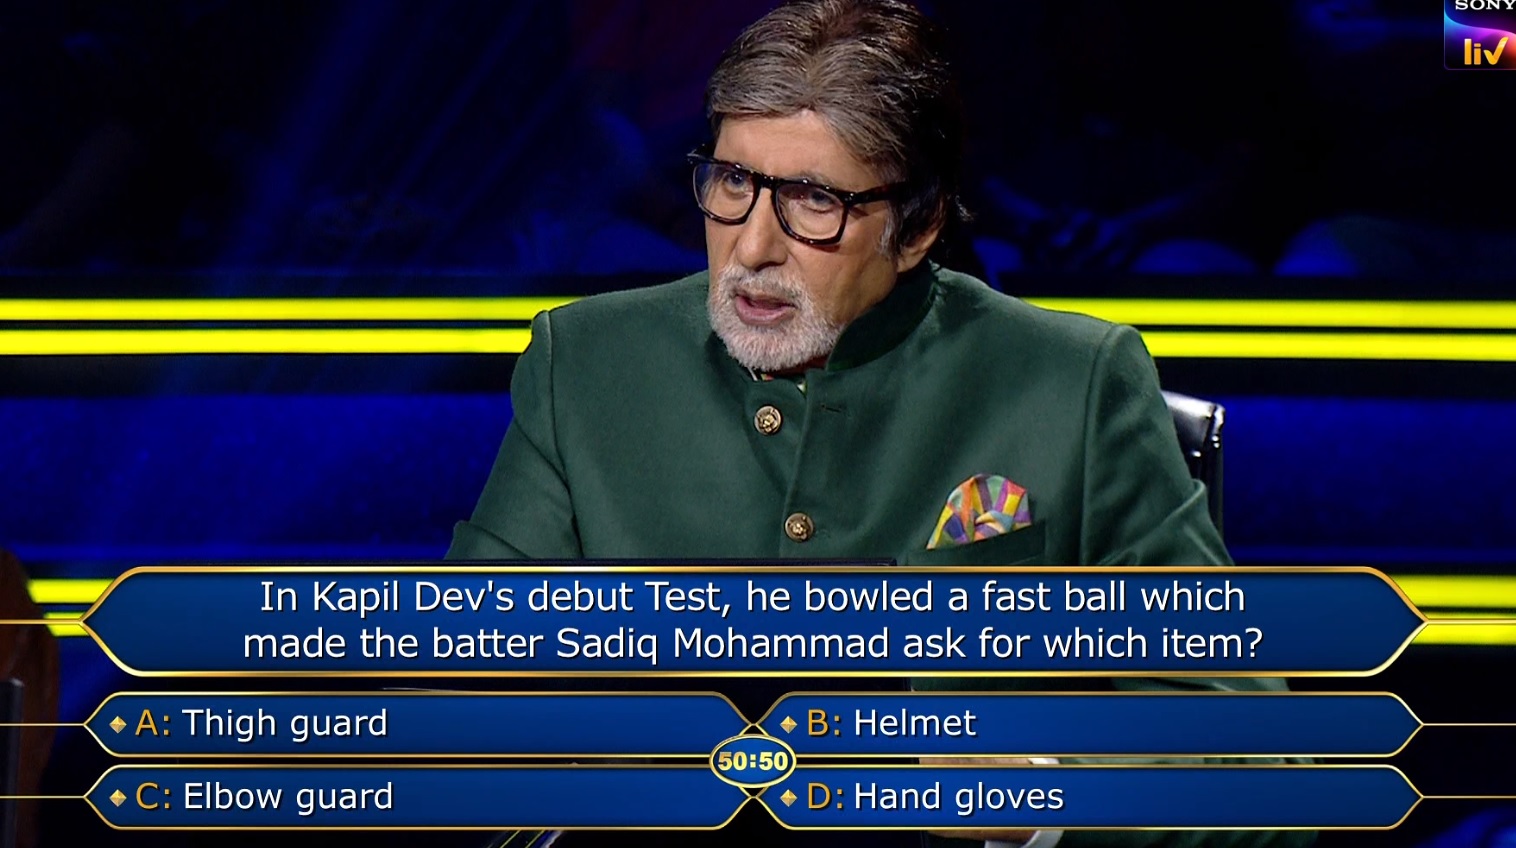 Ques : In Kapil Dev’s debut, he bowled a fast ball which made the batter Sadiq Mohammad ask for which item?